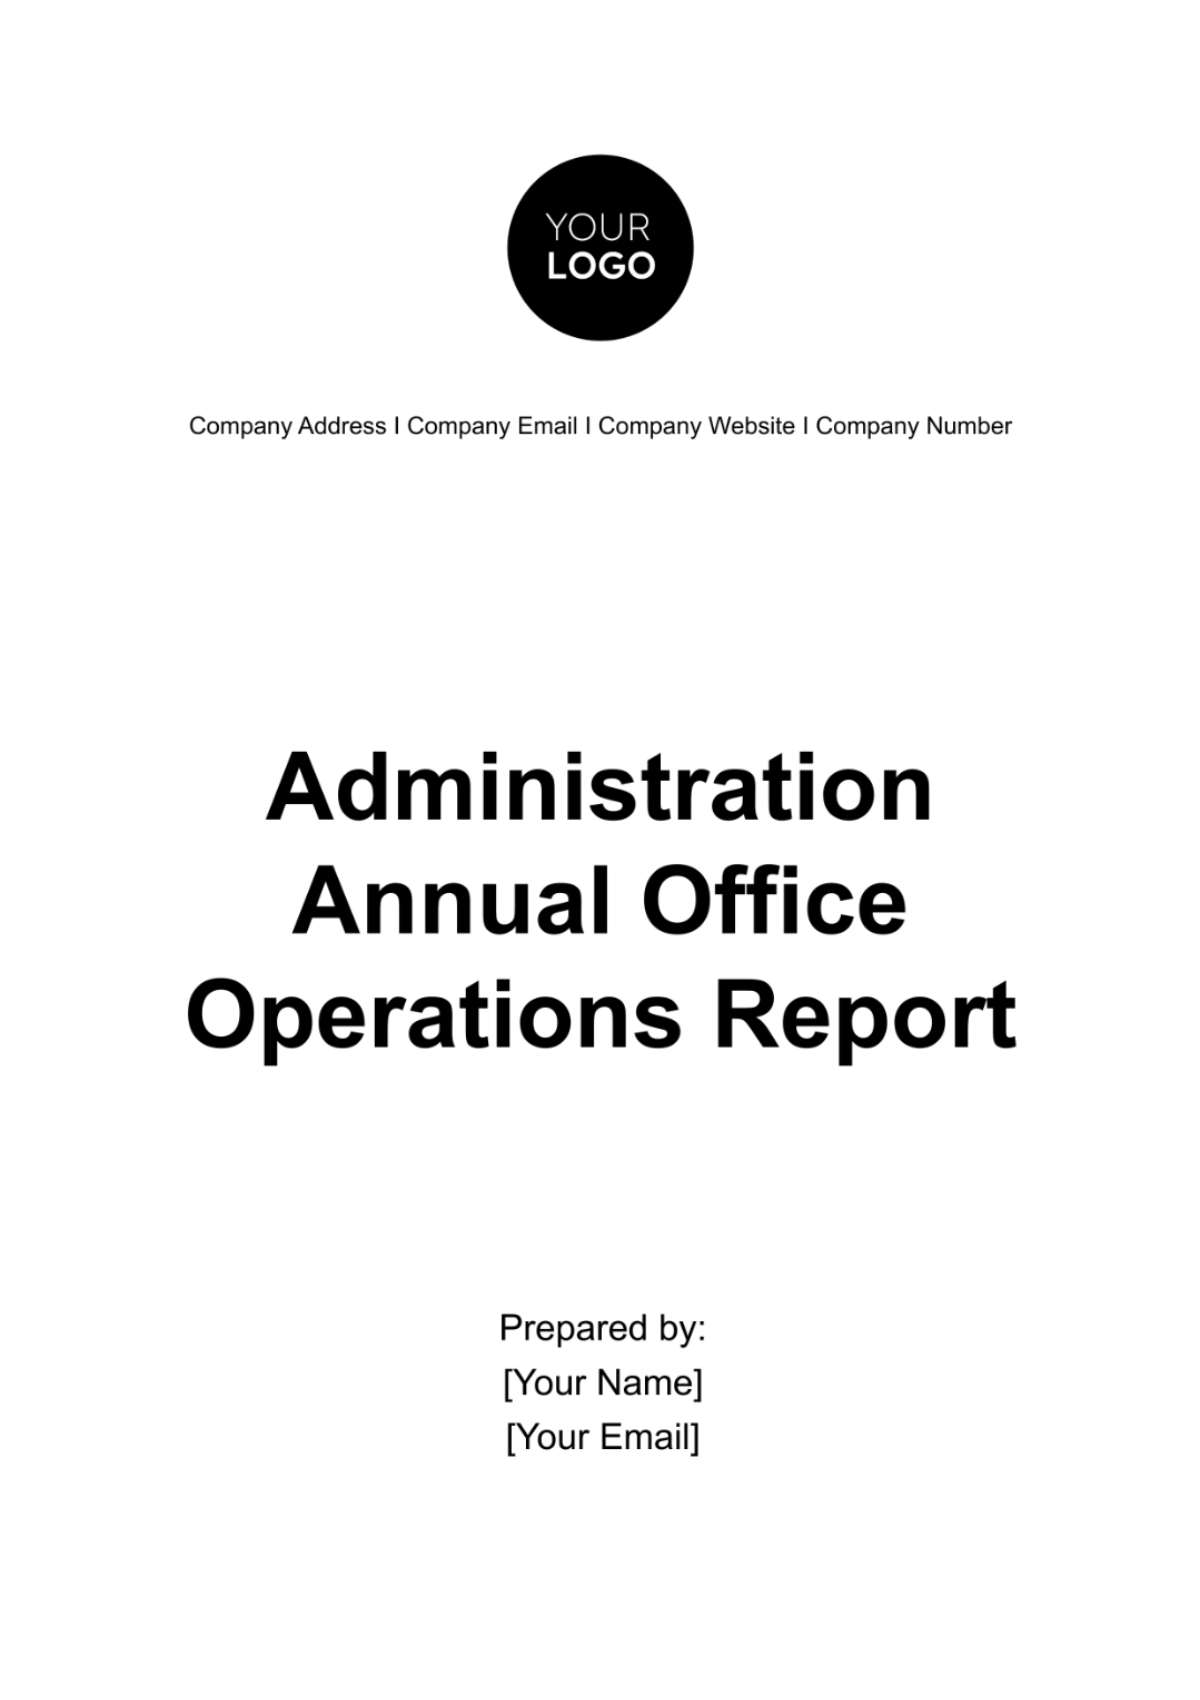 Administration Annual Office Operations Report Template